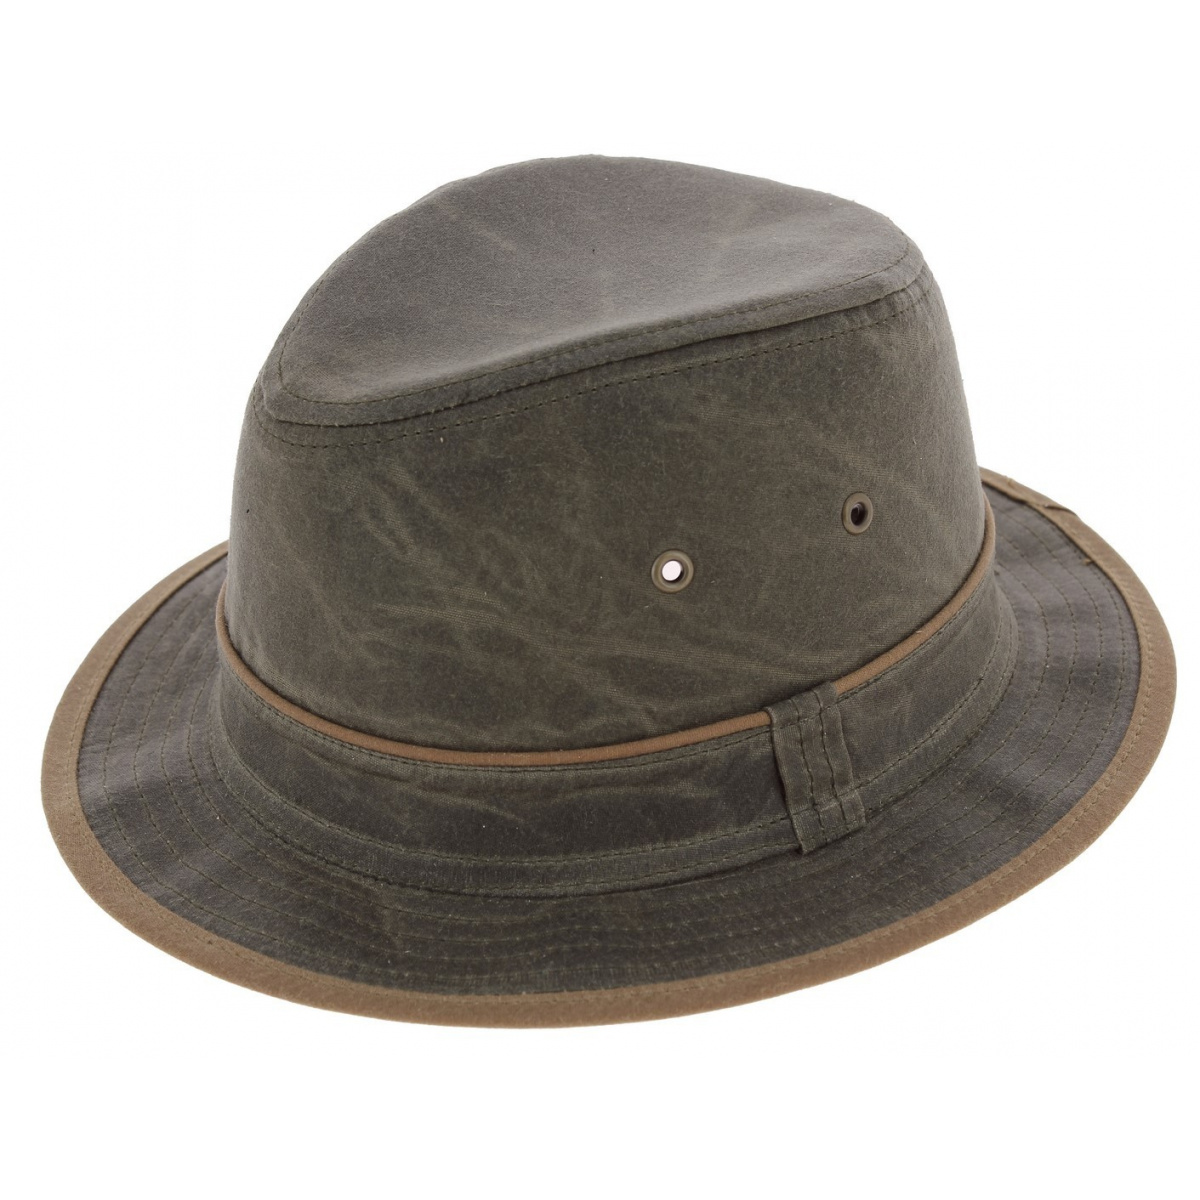 Chapeau de pluie rain made in france- Chapellerie Traclet Reference : 3238